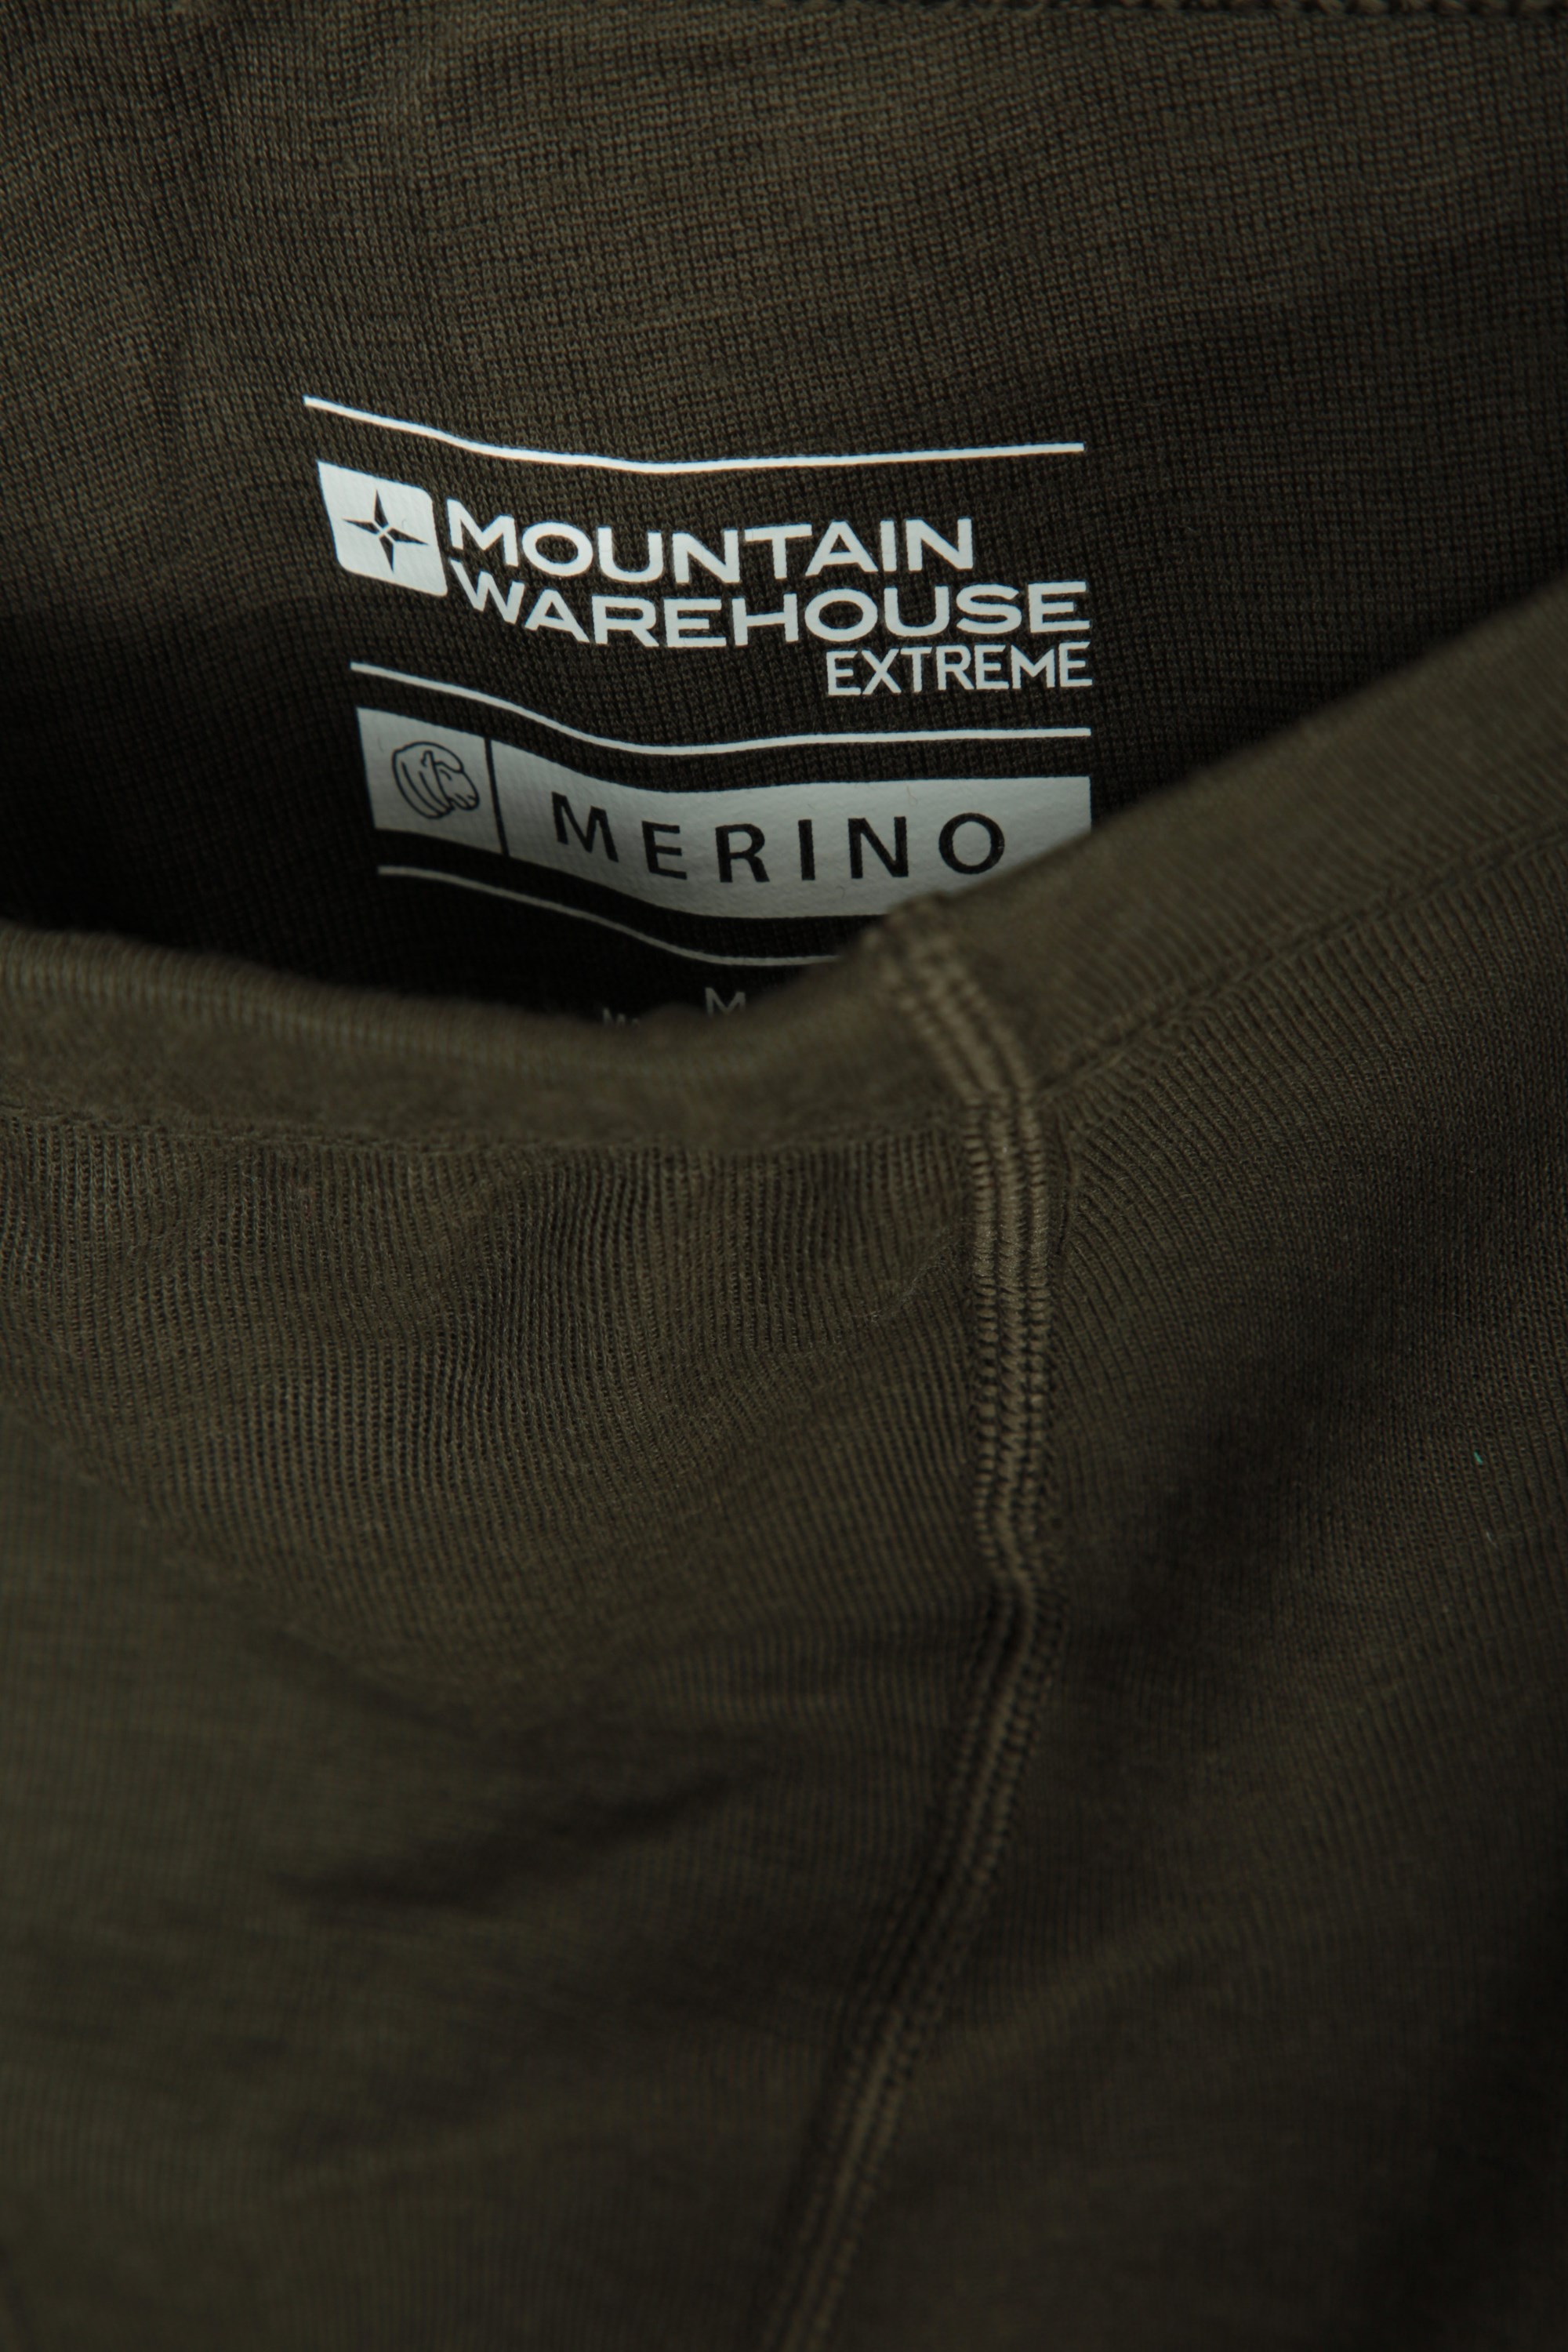 Mountain Warehouse Mens Merino Thermal Base Layer Trousers Lightweight with Fly